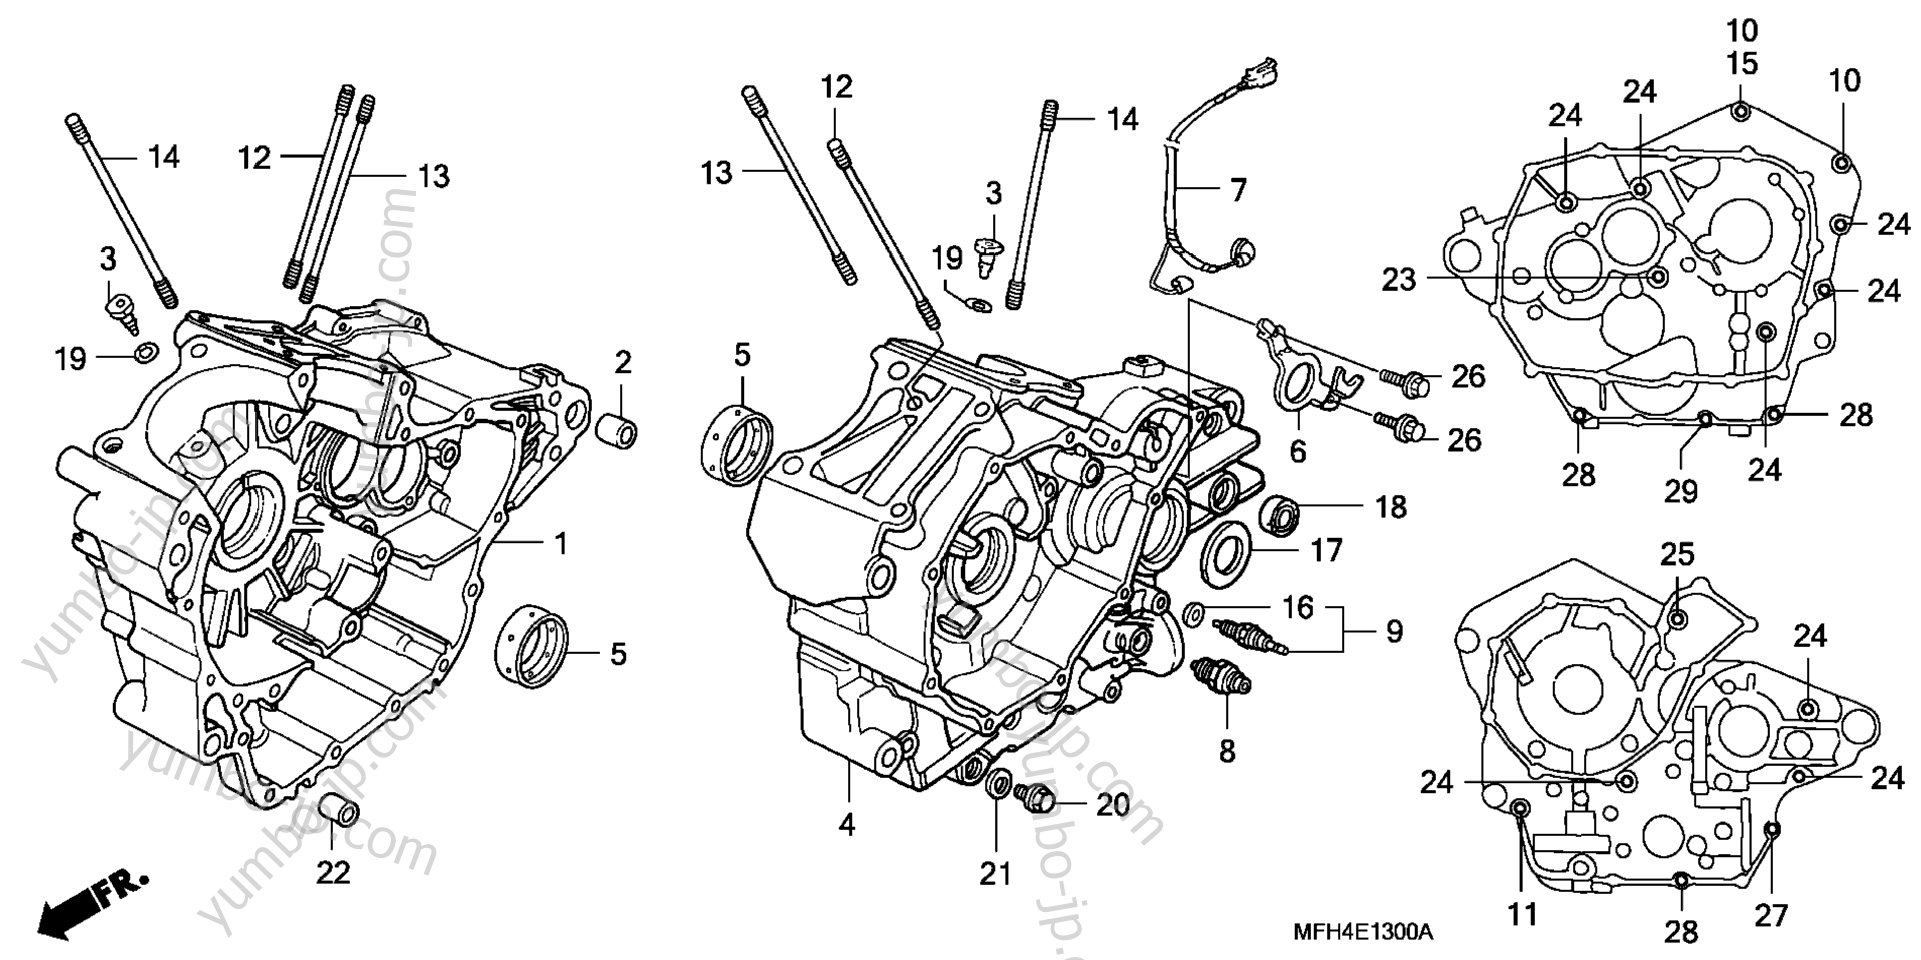 CRANKCASE for motorcycles HONDA VT600C A/A 2006 year